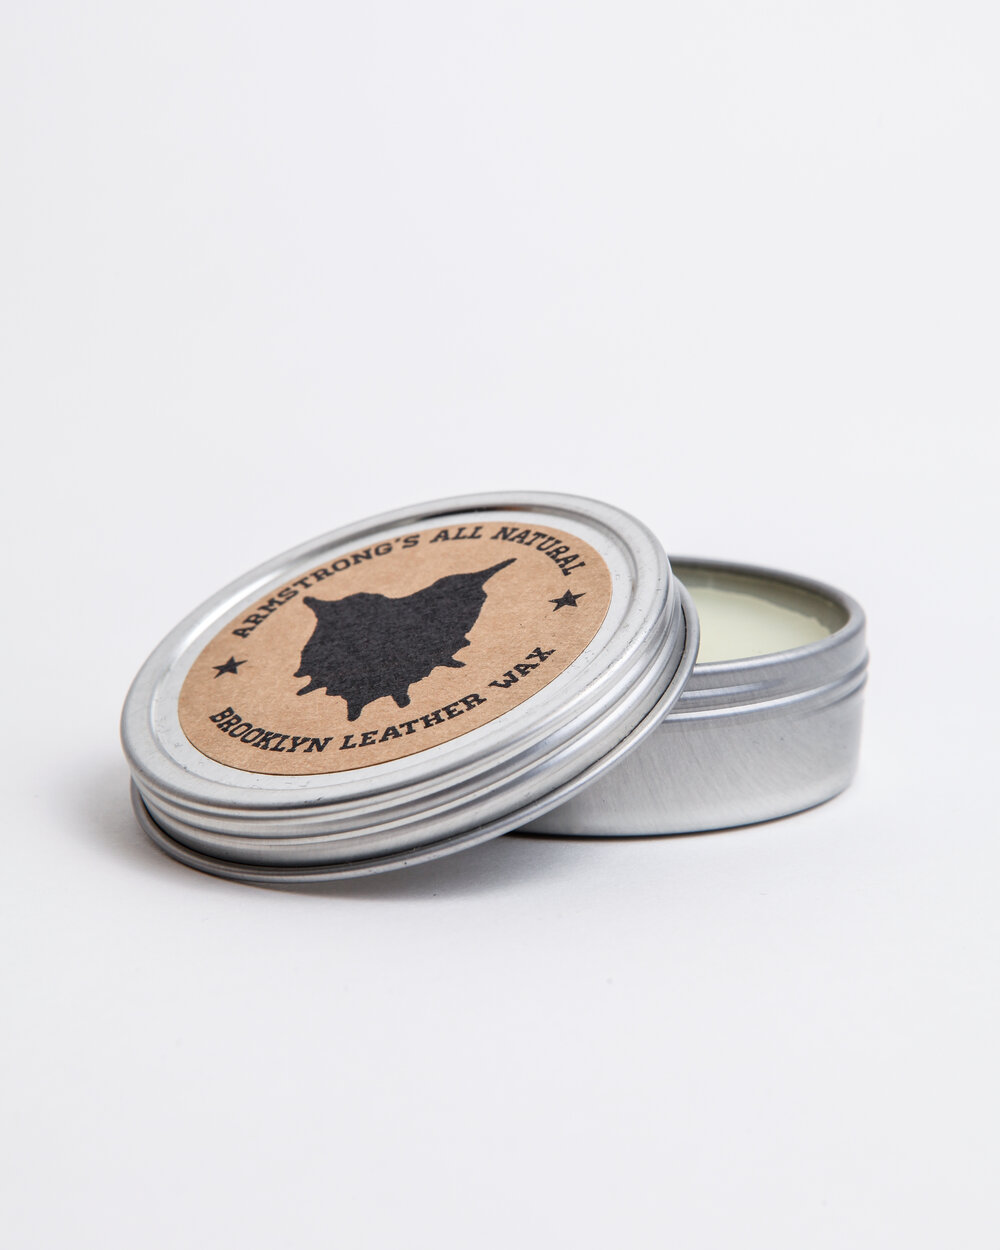 Brooklyn Leather Wax — Armstrong's All Natural - Made in USA